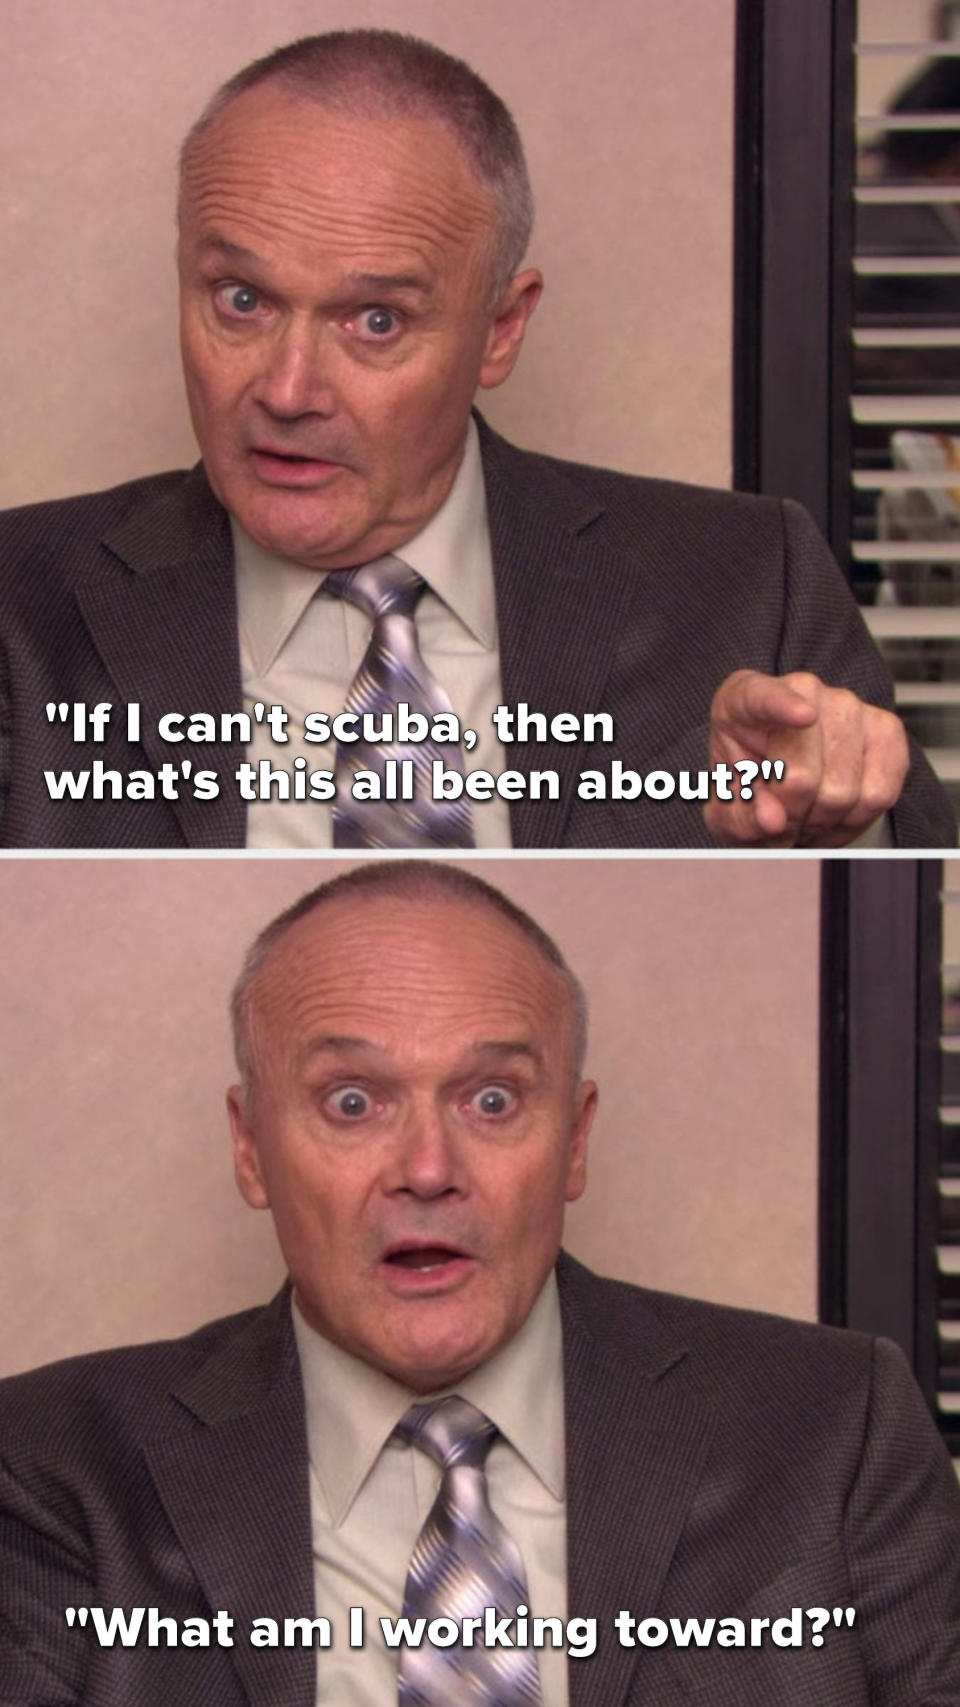 Creed says, If I can't scuba, then what's this all been about, what am I working toward